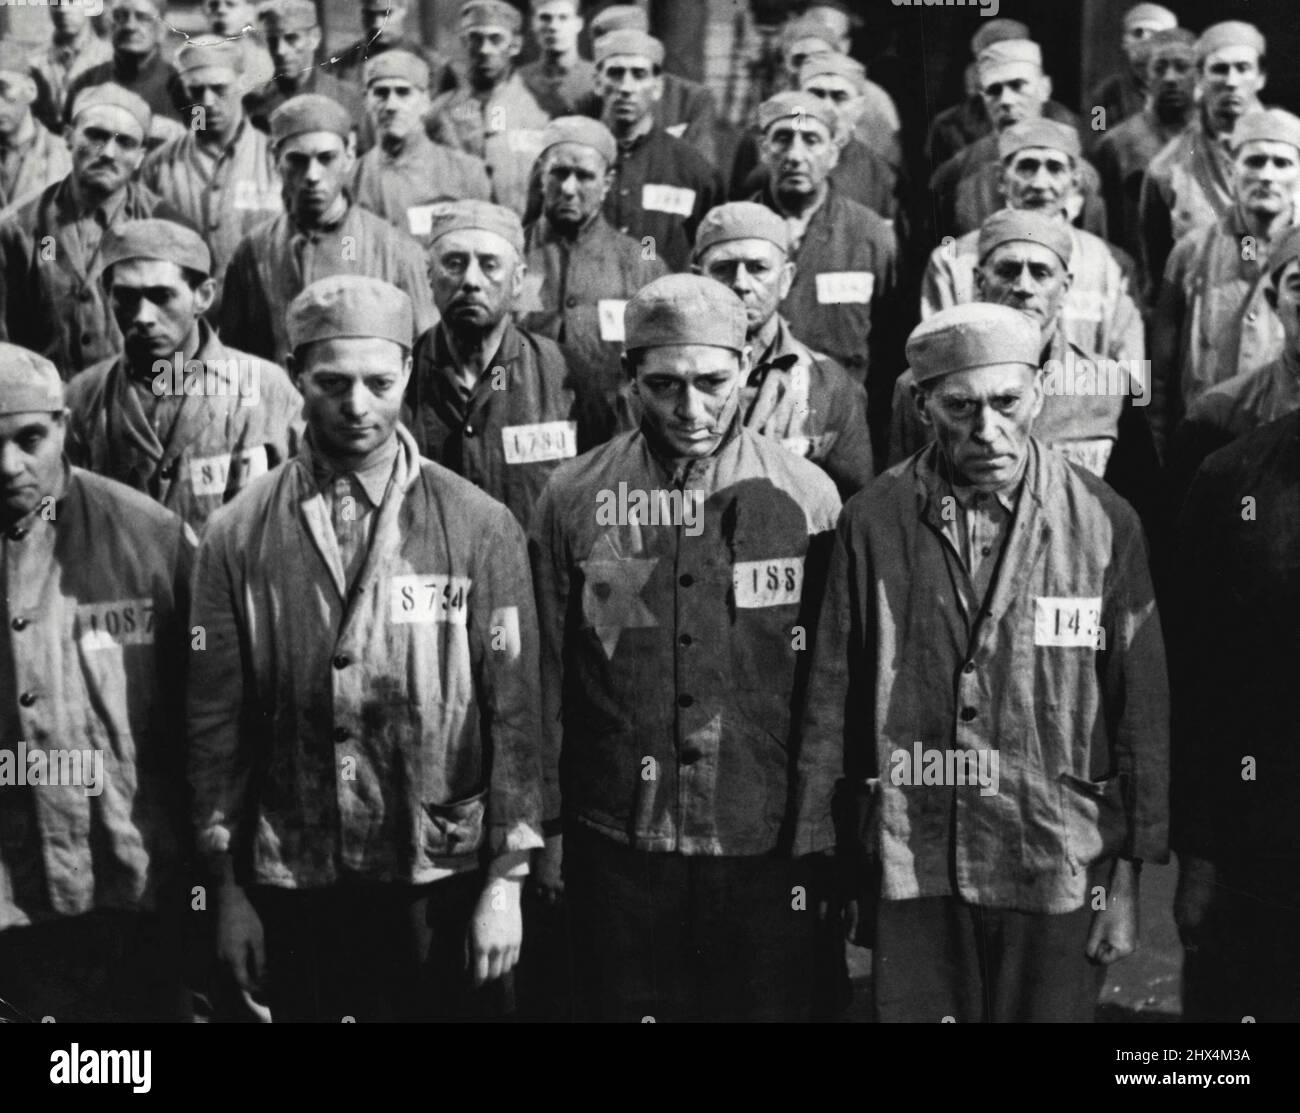 Pastor Hall (Niemoller) -- Soon they are put into dirty grey brown uniforms. The prisoners are given distinguishing marks according the their 'crimes'. February 22, 1950. (Photo by Douglas Slocombe, Black Star) Stock Photo